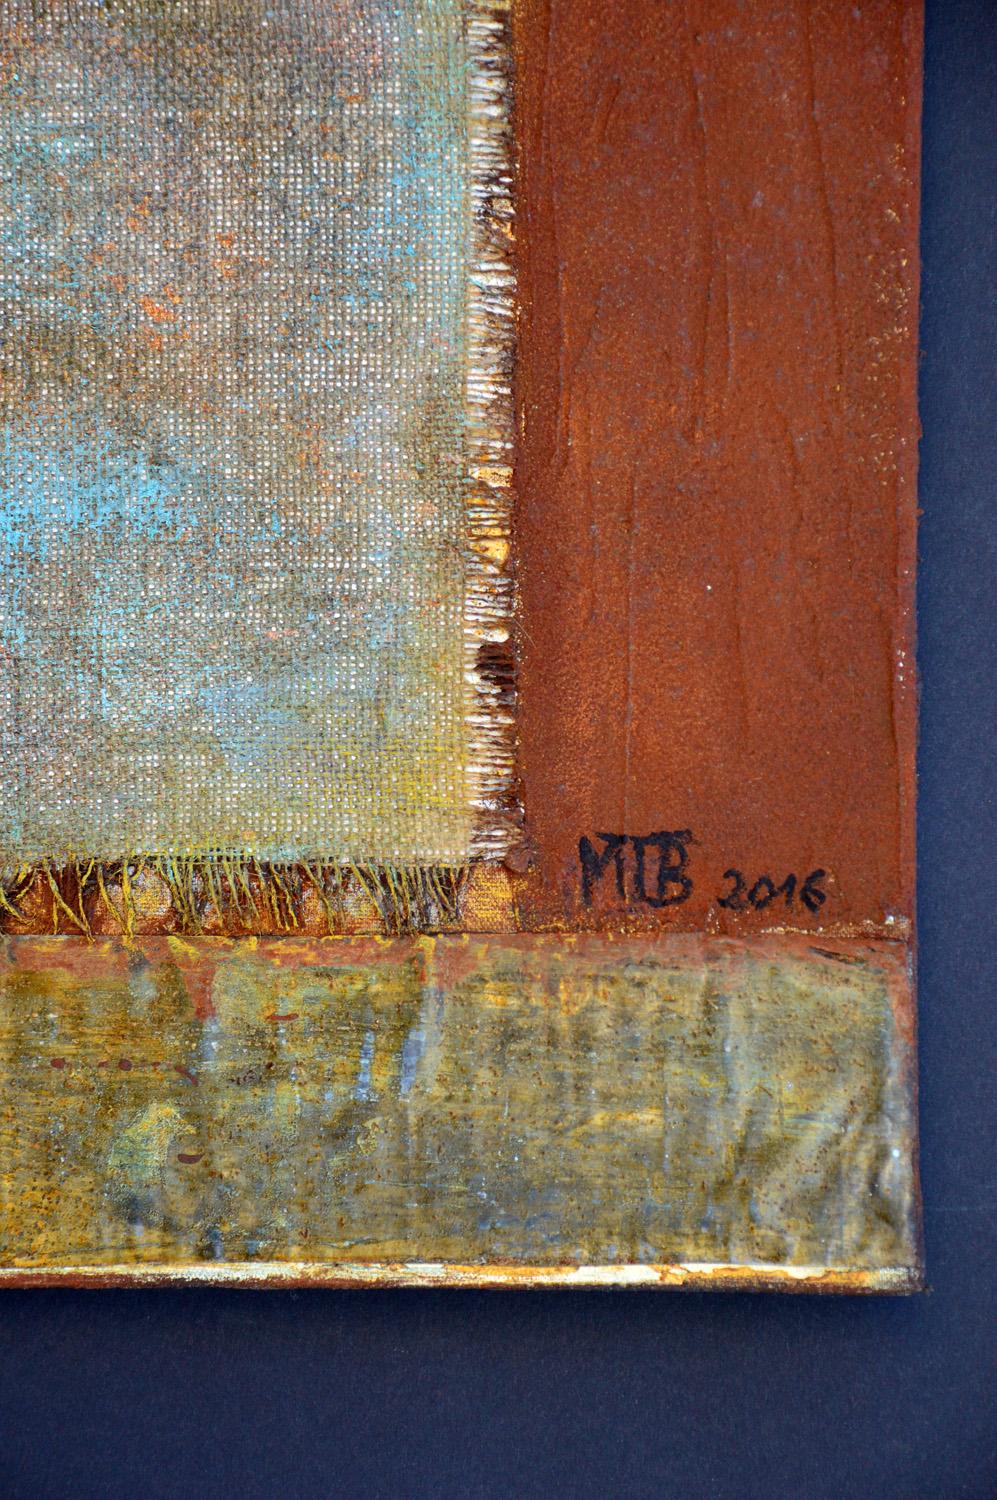 Preparations with oxides, tin and
burlap with various paintings
solidified